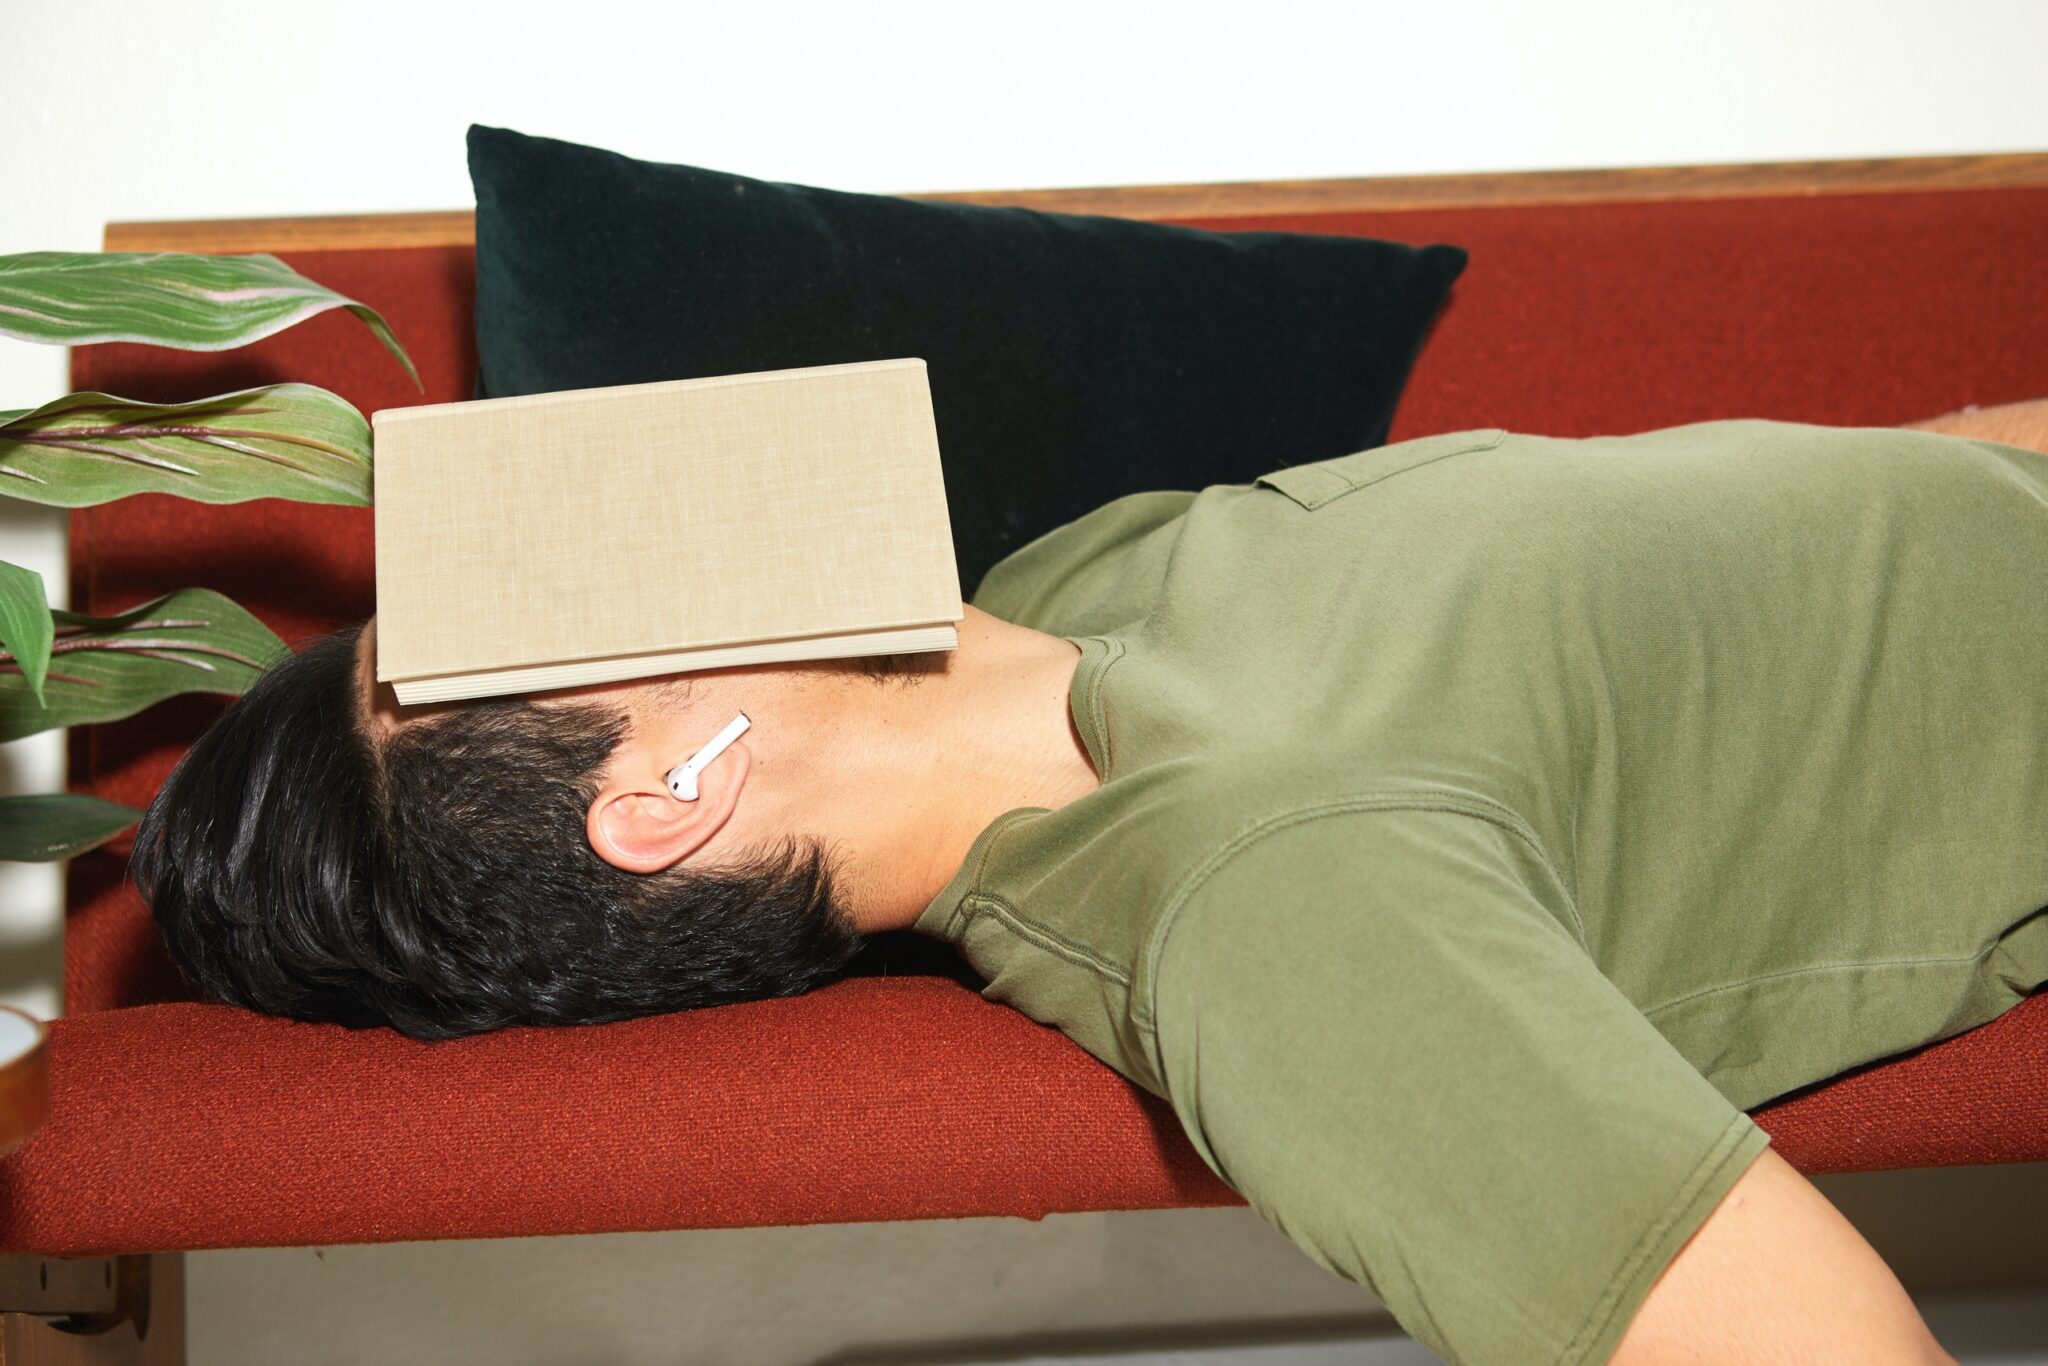 Man on couch with off white book covering face + aripods